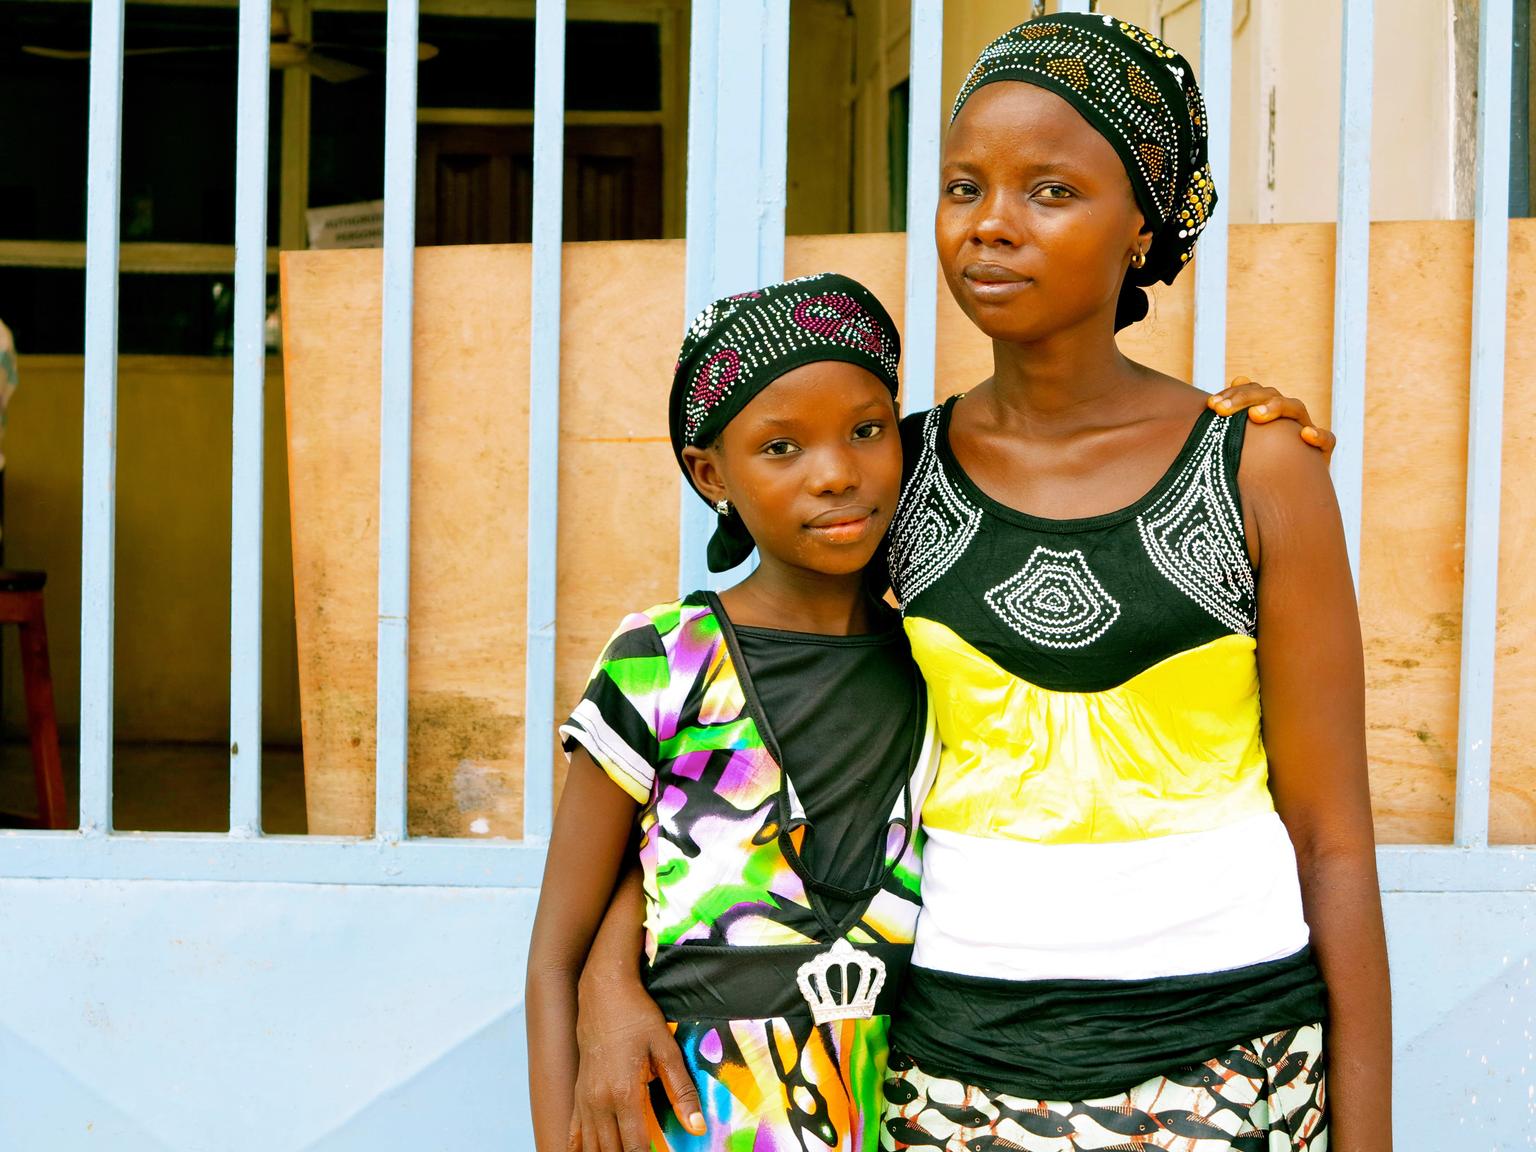 In July 2014 in Sierra Leone, Fatmata Sesay stands with her 11-year-old daughter, Tata, both survivors of Ebola virus disease (EVD), in the city of Kenema, Eastern Province.